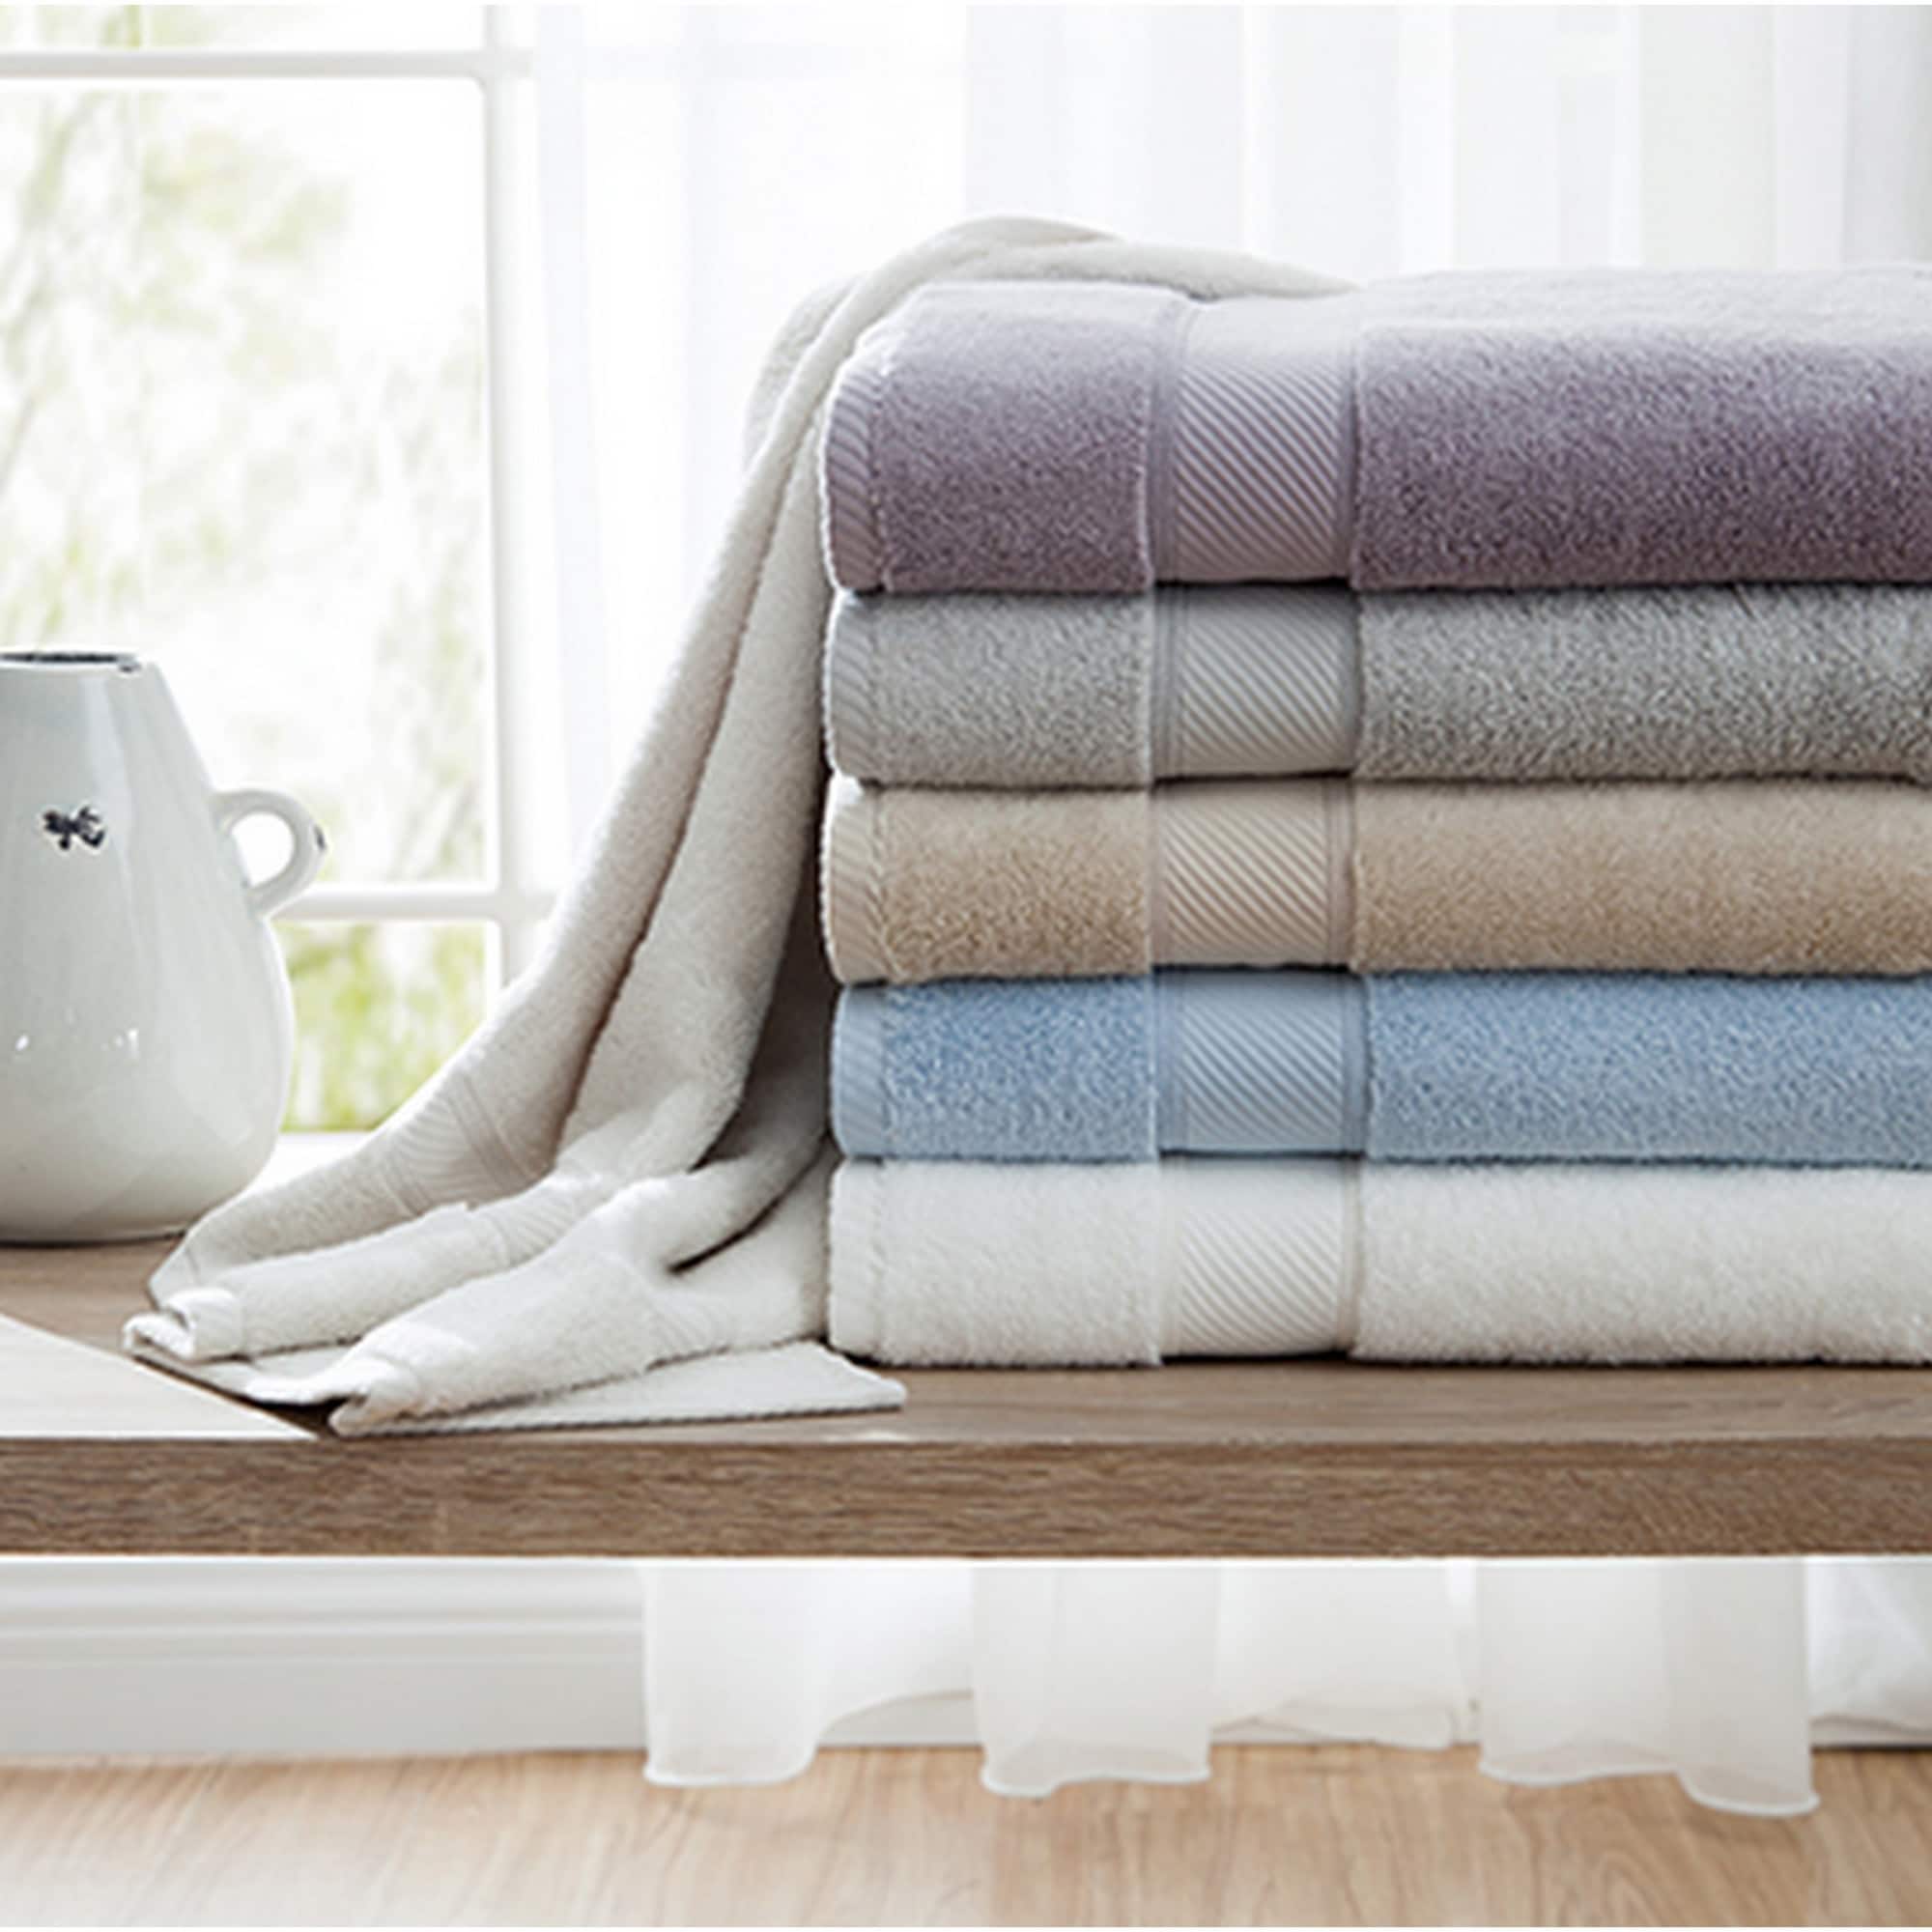 https://ak1.ostkcdn.com/images/products/17982488/Charisma-Classic-II-Towel-Collection-Bath-Hand-Wash-Towel-Sold-Seperately-f3d9533a-c822-4680-af4e-512c510afb3d.jpg